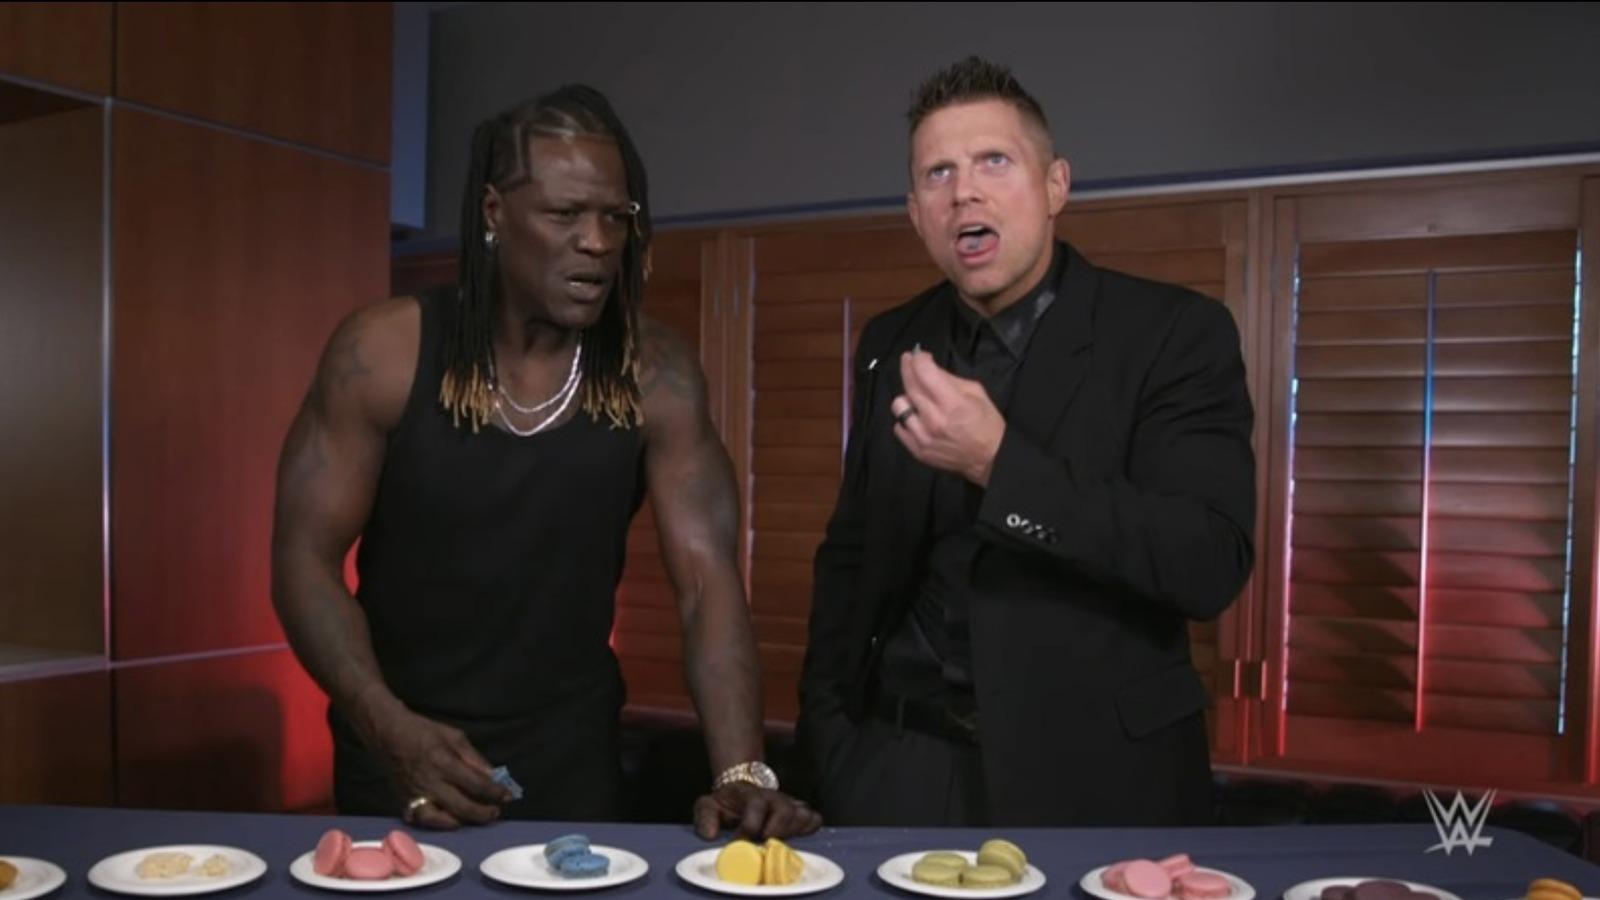 Ahead of the Backlash PLE in France, WWE superstars try French macaron flavors for the first time